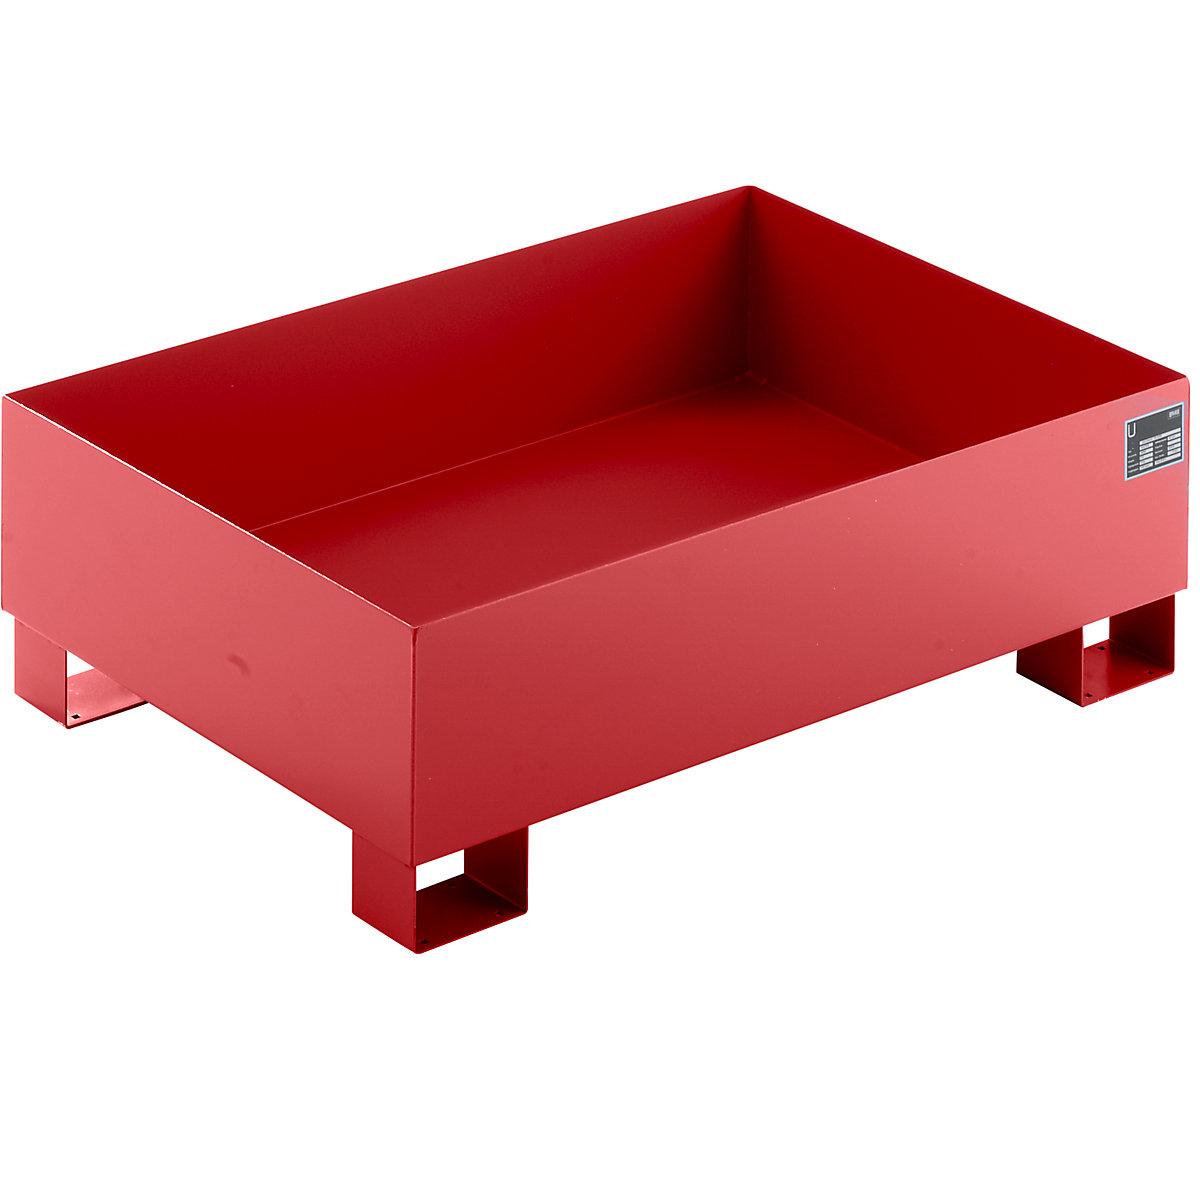 EUROKRAFTbasic – Sump tray made from sheet steel, LxWxH 1200 x 800 x 360 mm, red RAL 3000